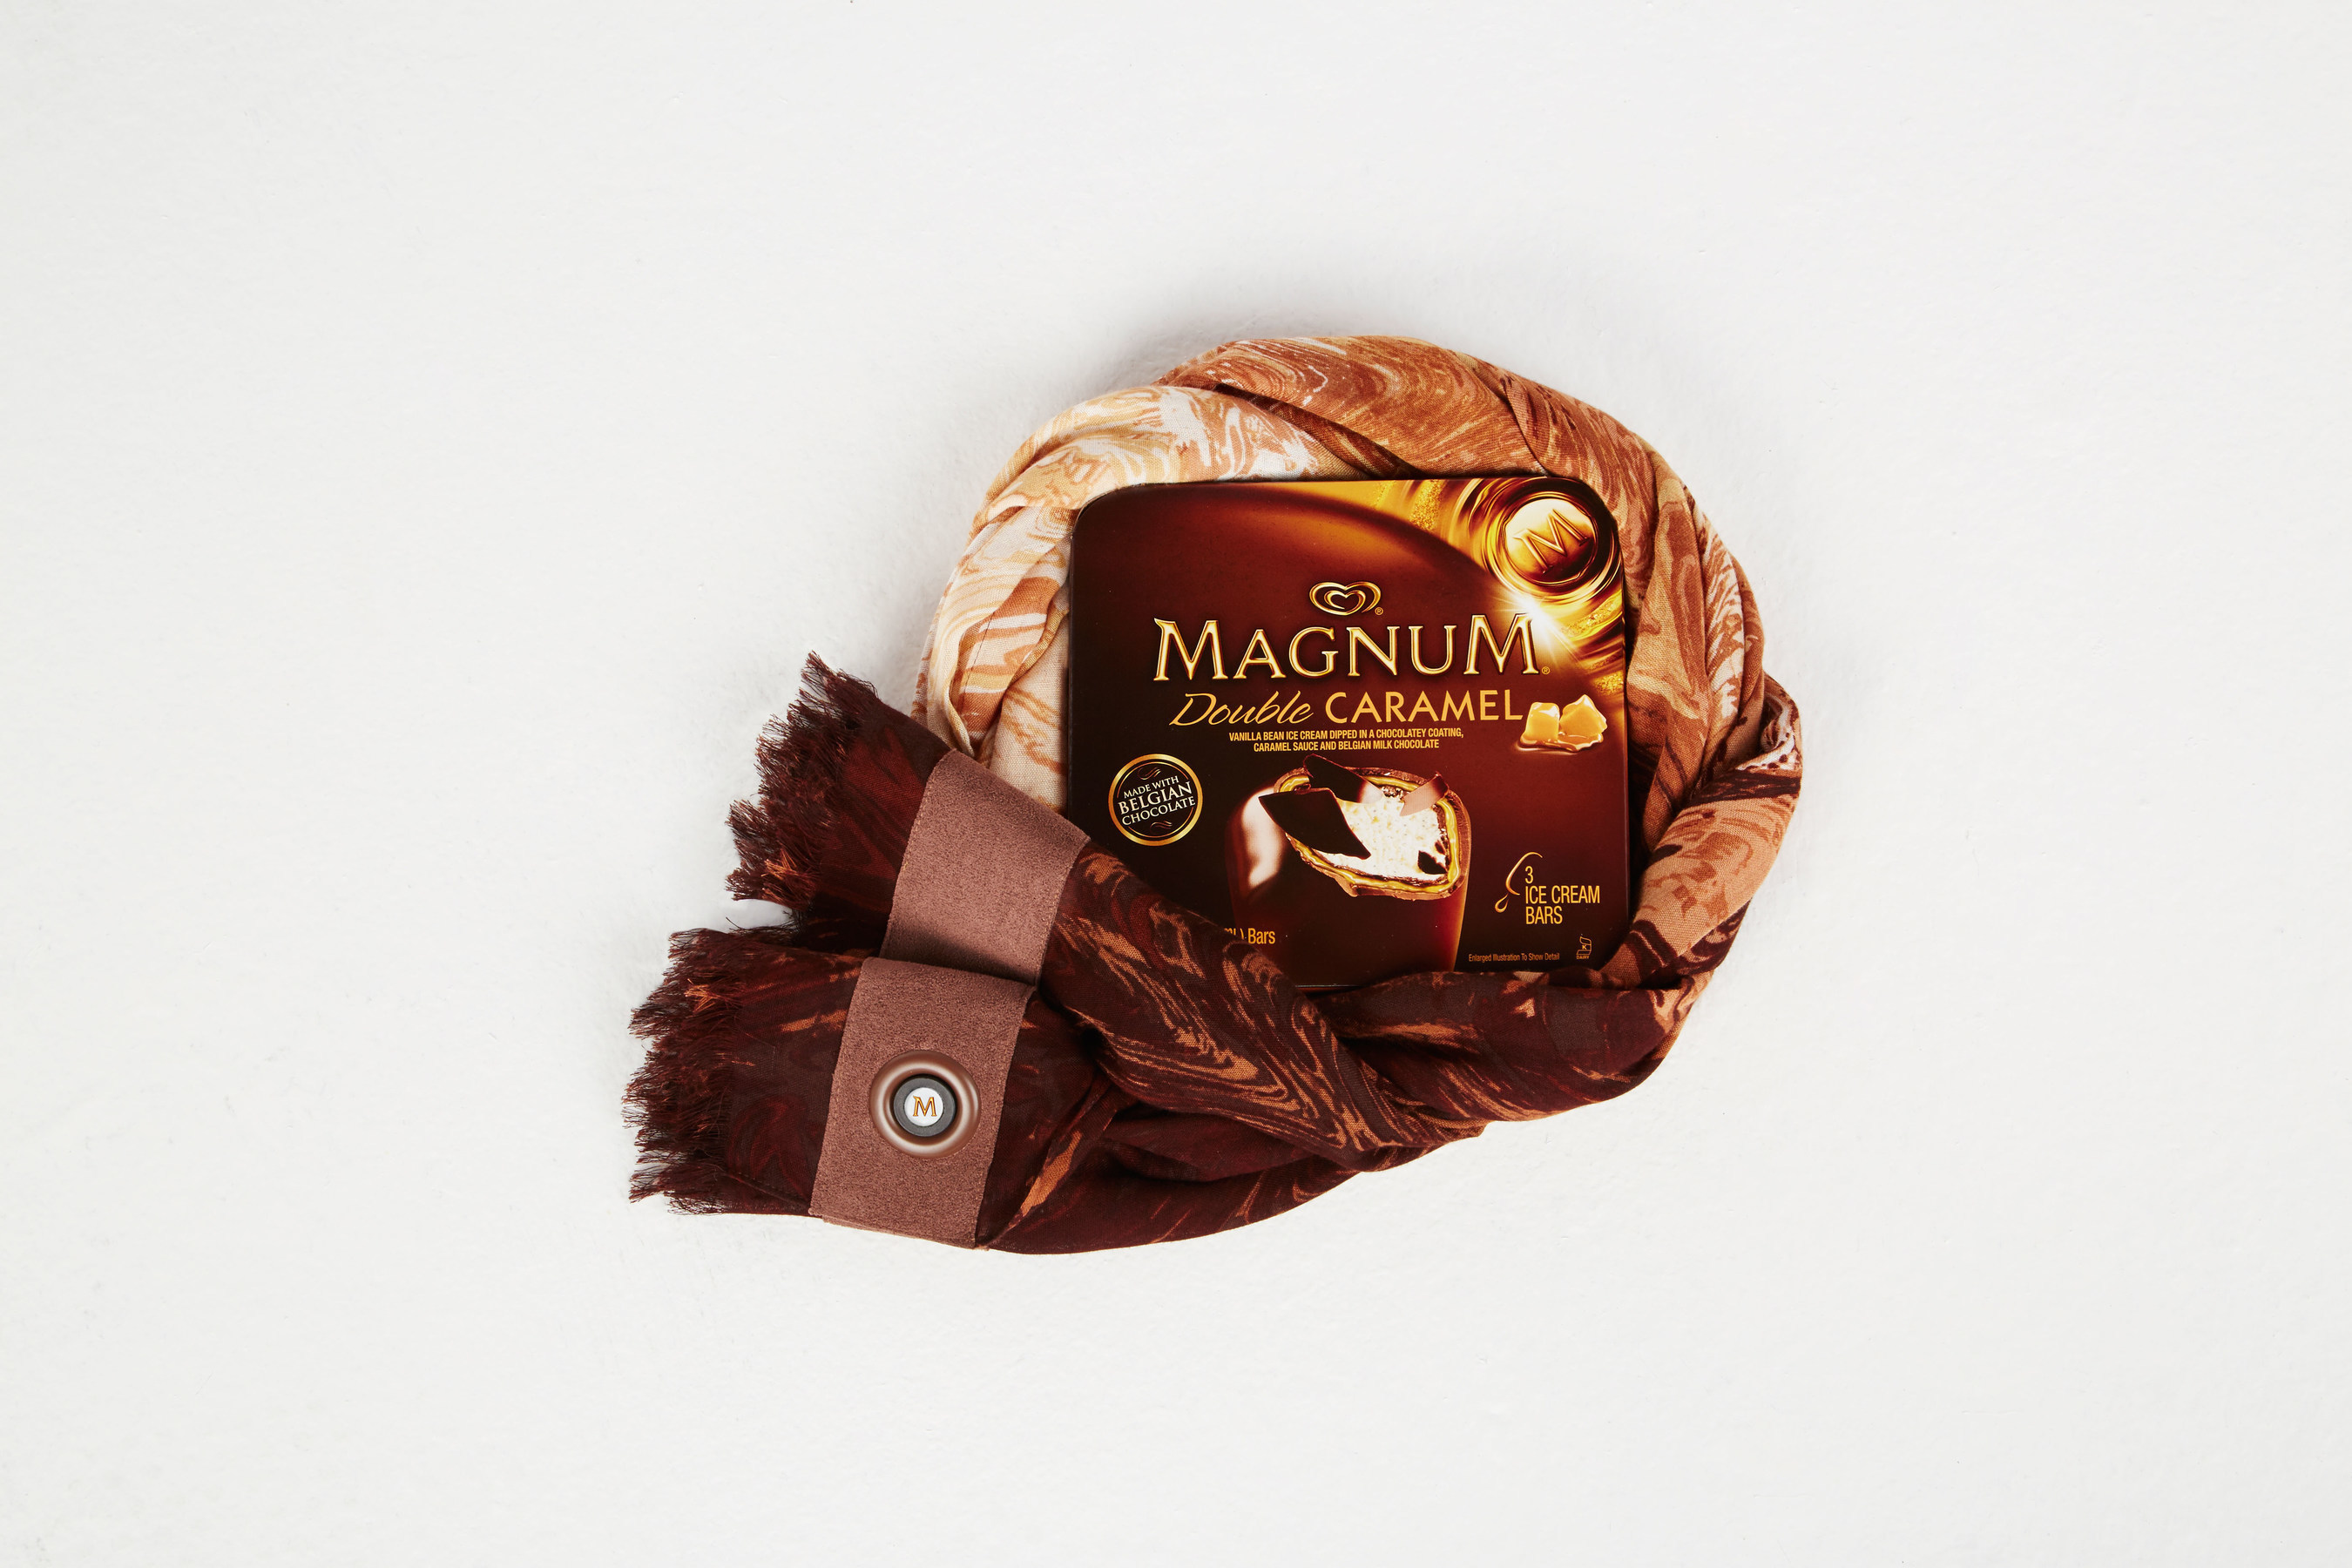 The BCBGMAXAZRIA for MAGNUM Belgian Chocolate Wrap, an innovative accessory infused with an aroma inspired by MAGNUM Belgian Chocolate. The wrap will be available as a limited edition 'gift with purchase' in select BCBGMAXAZRIA stores nationwide this summer.